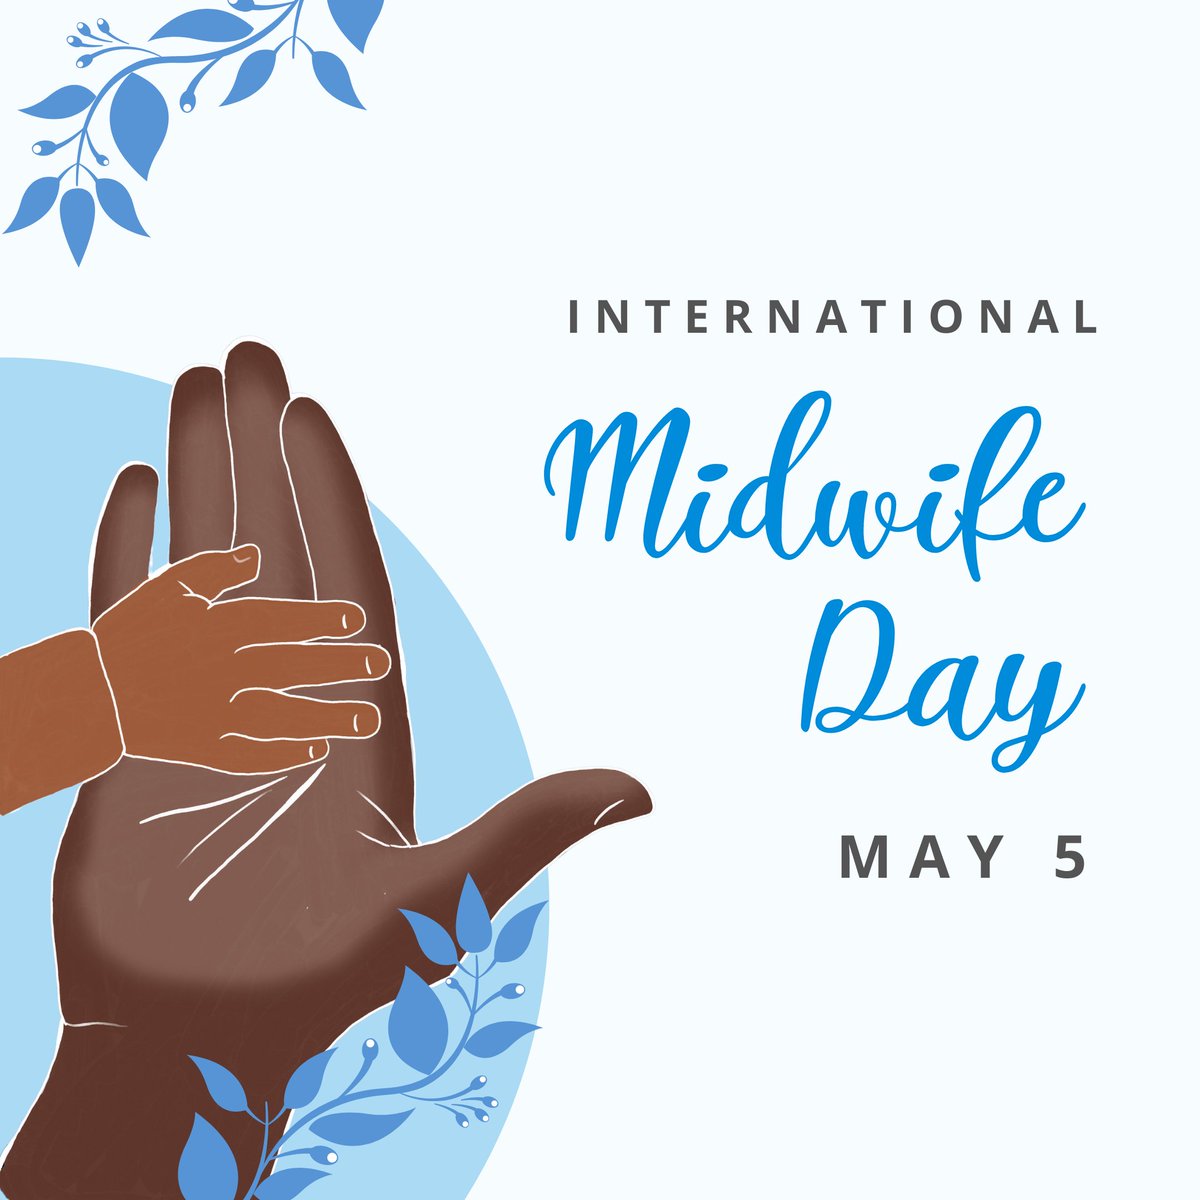 Happy #InternationalDayOfMidwives to all the incredible midwives in Rwanda! You play a vital role in ensuring safe pregnancies & childbirth for mothers & babies. Your dedication & expertise have contributed to the reduction of maternal & newborn deaths. Thank you!